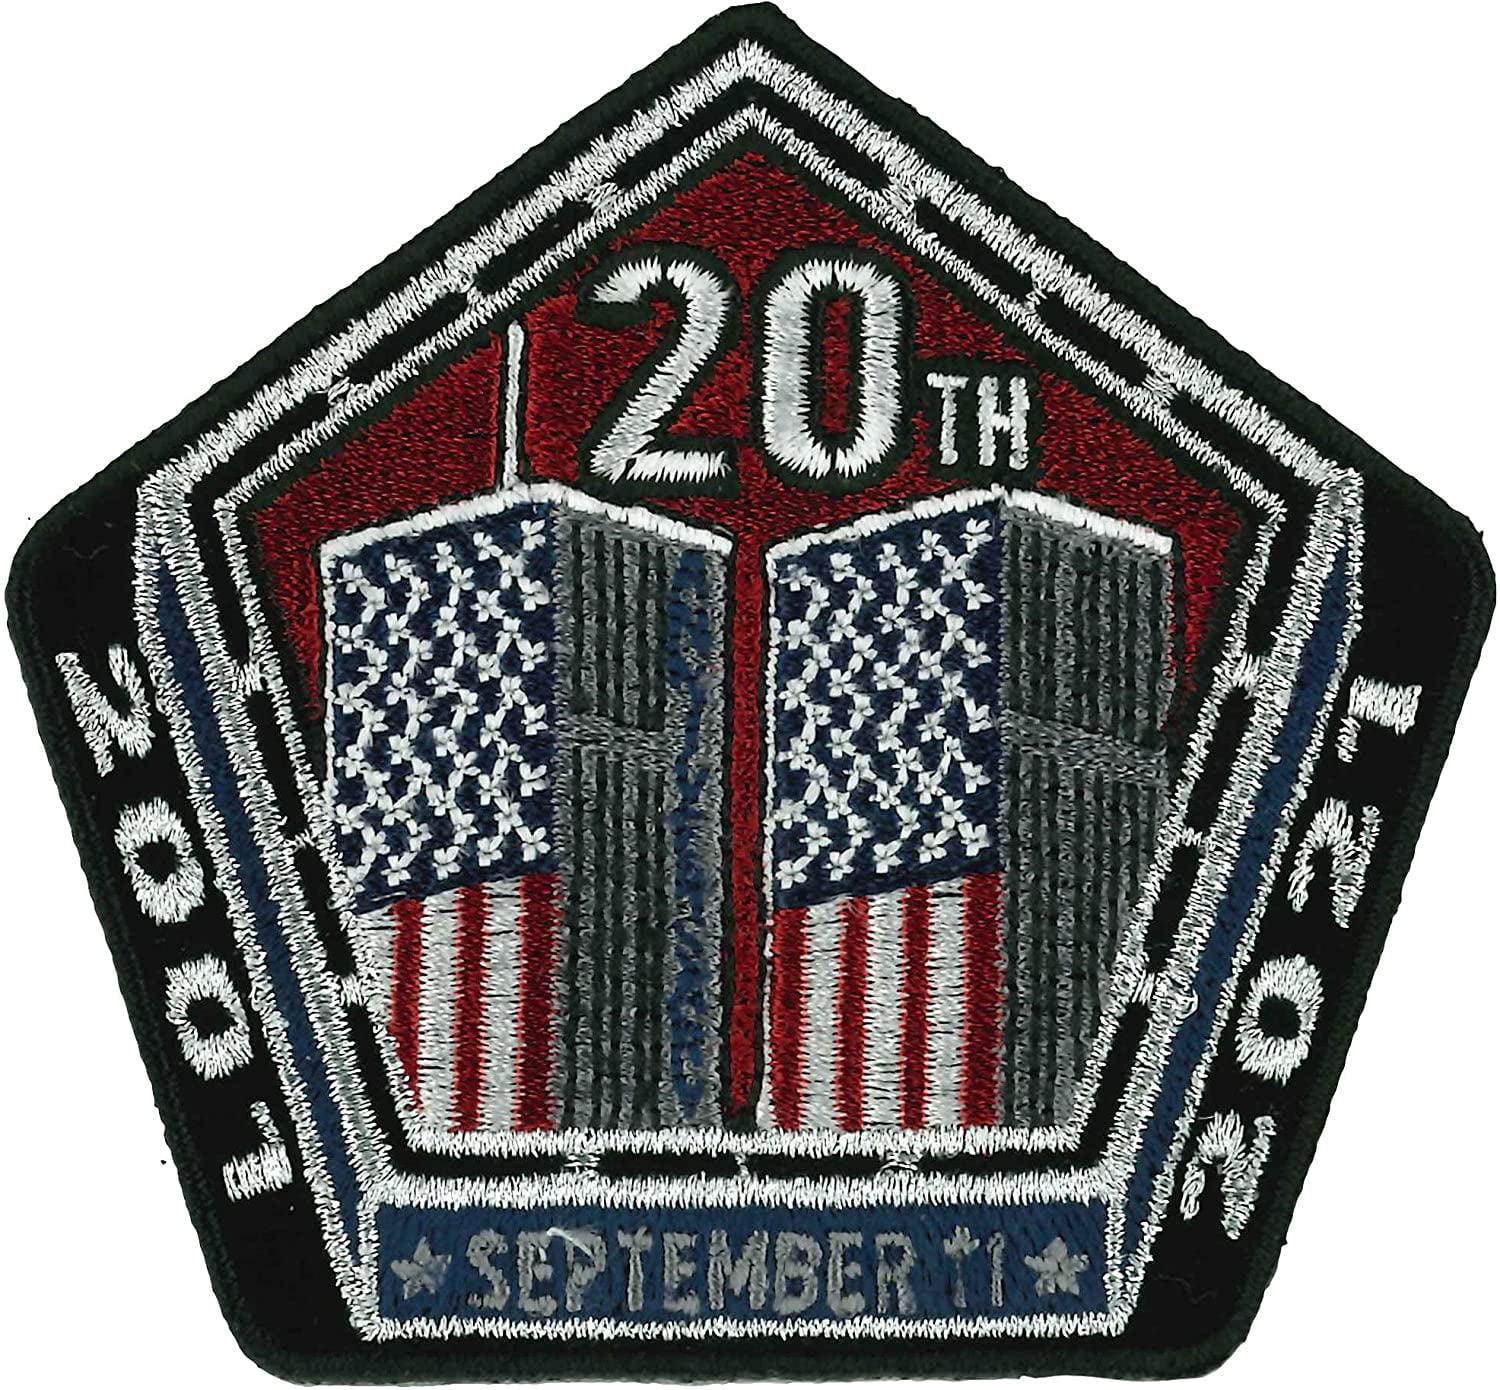 911 10th Anniversary Iron On Patch Hat Jacket FREE SHIP 